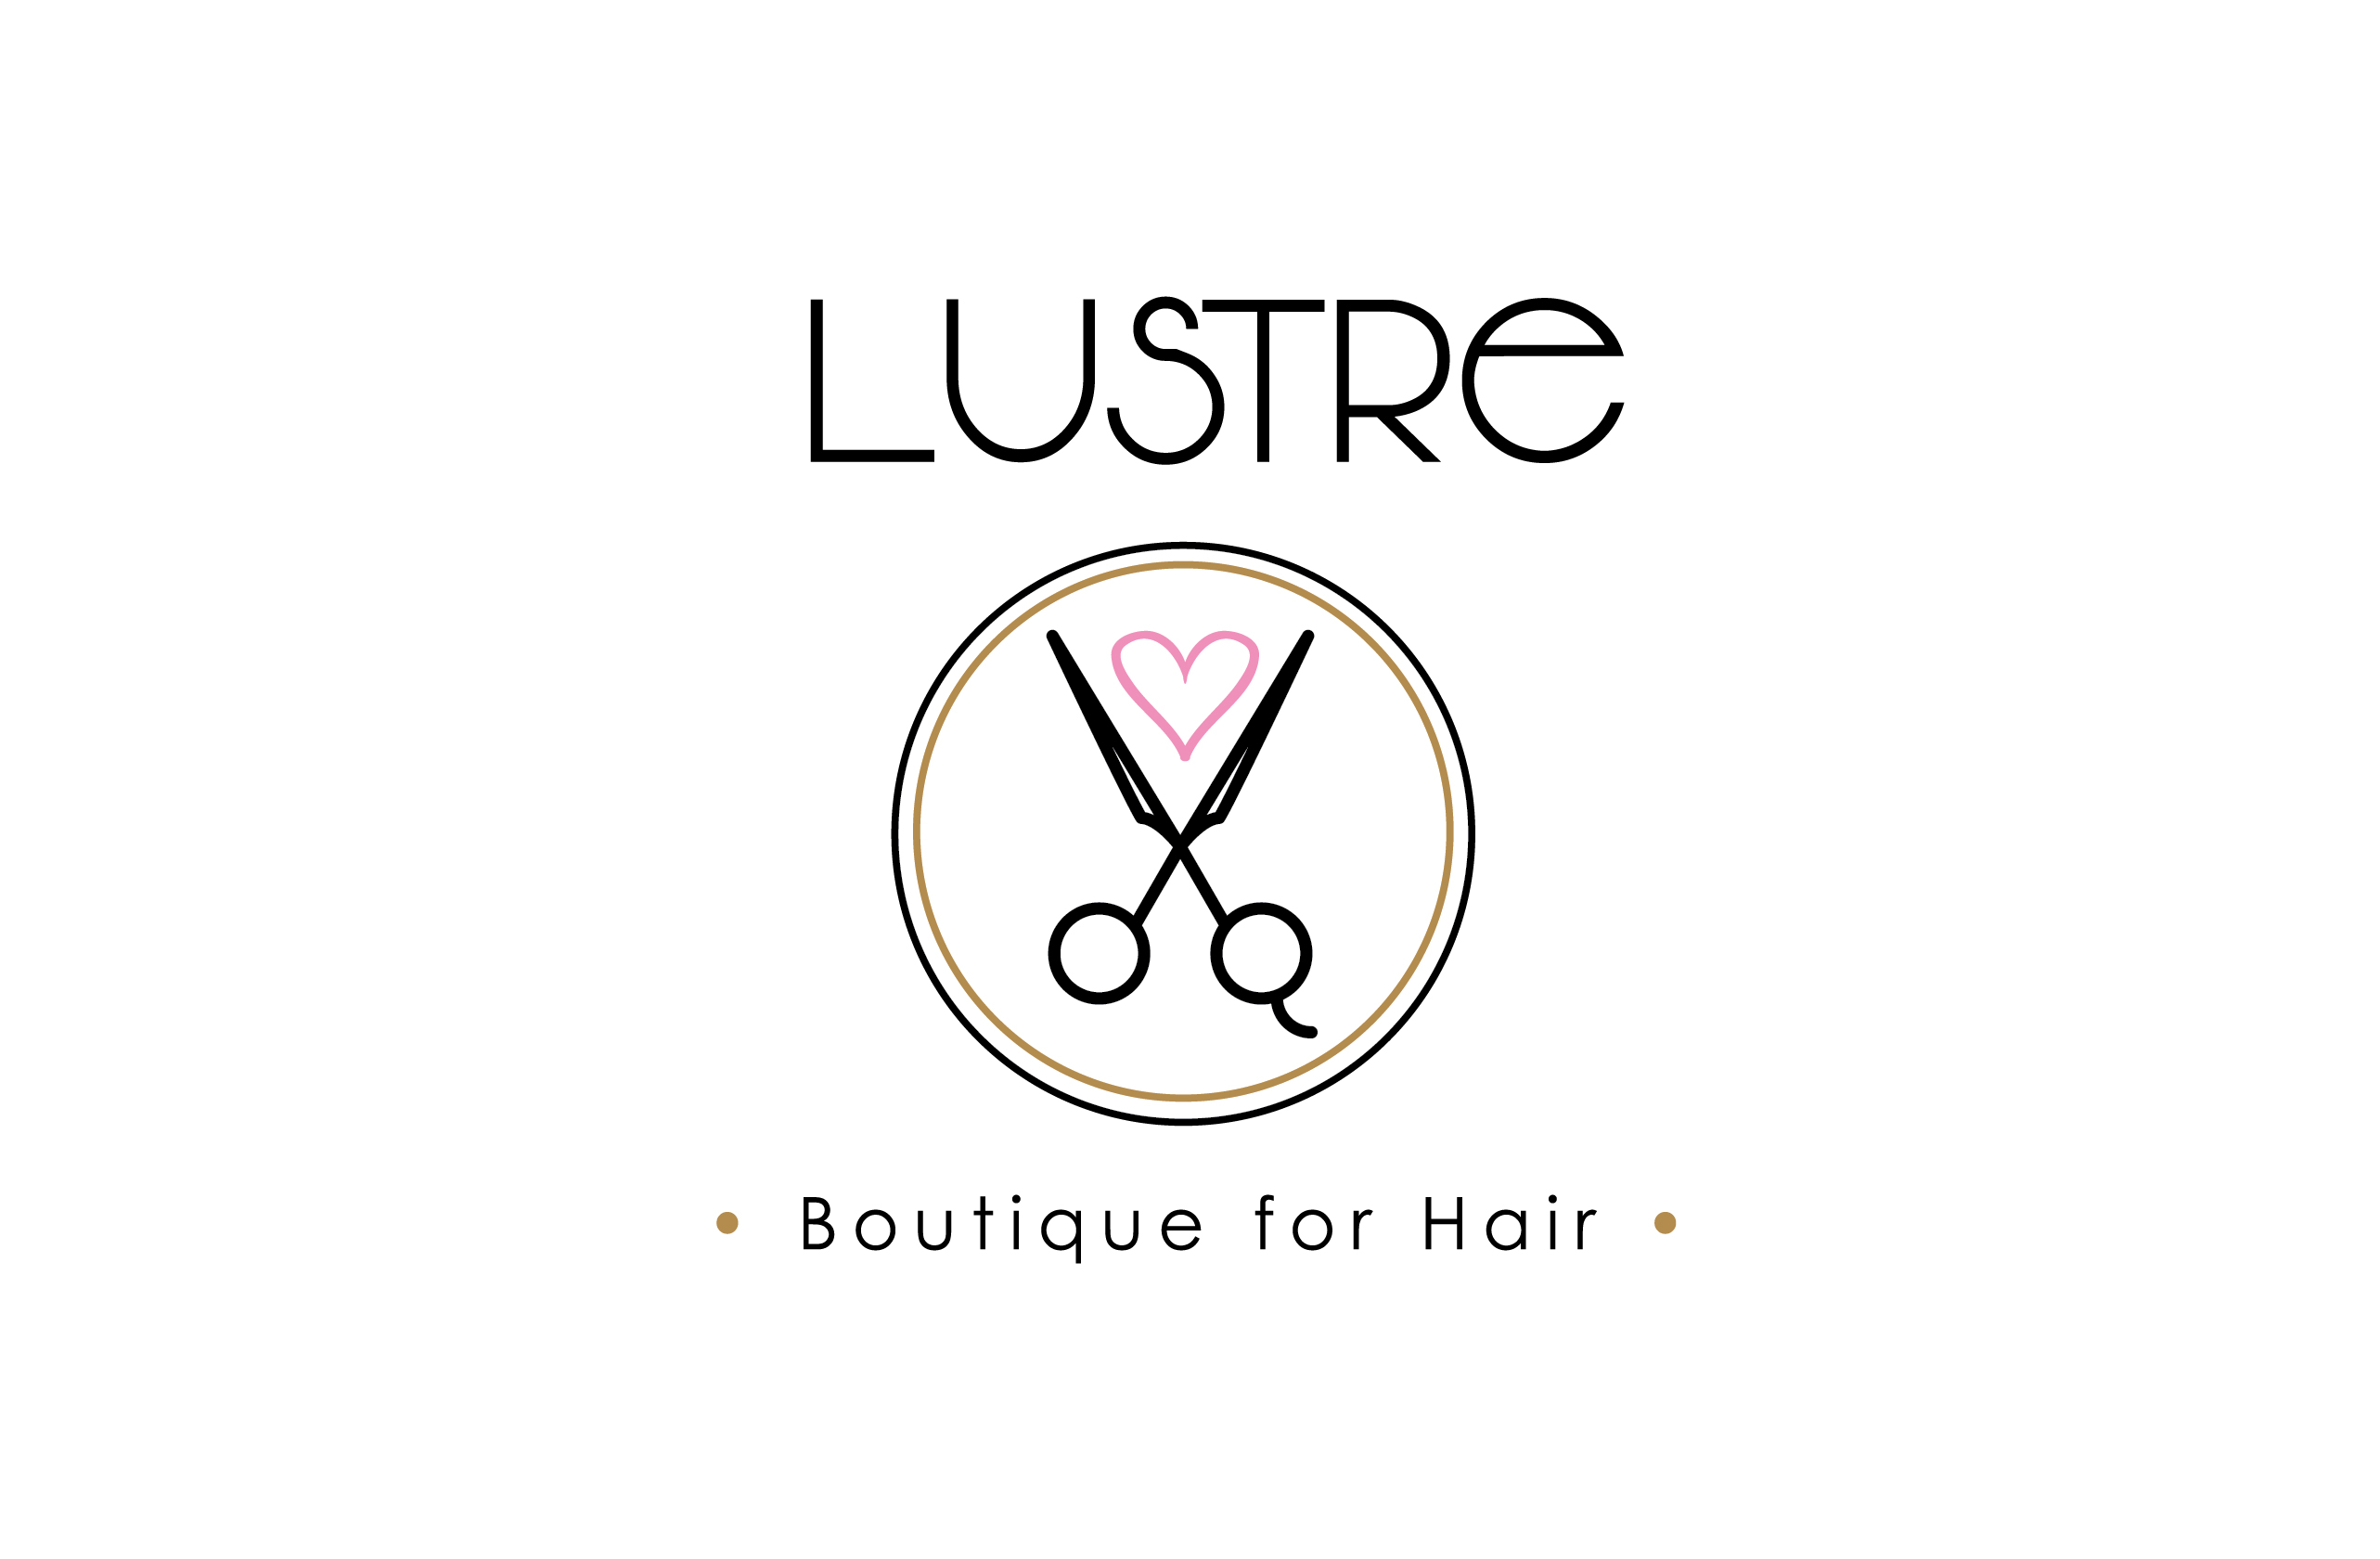 USTRC

Boutique for Hair